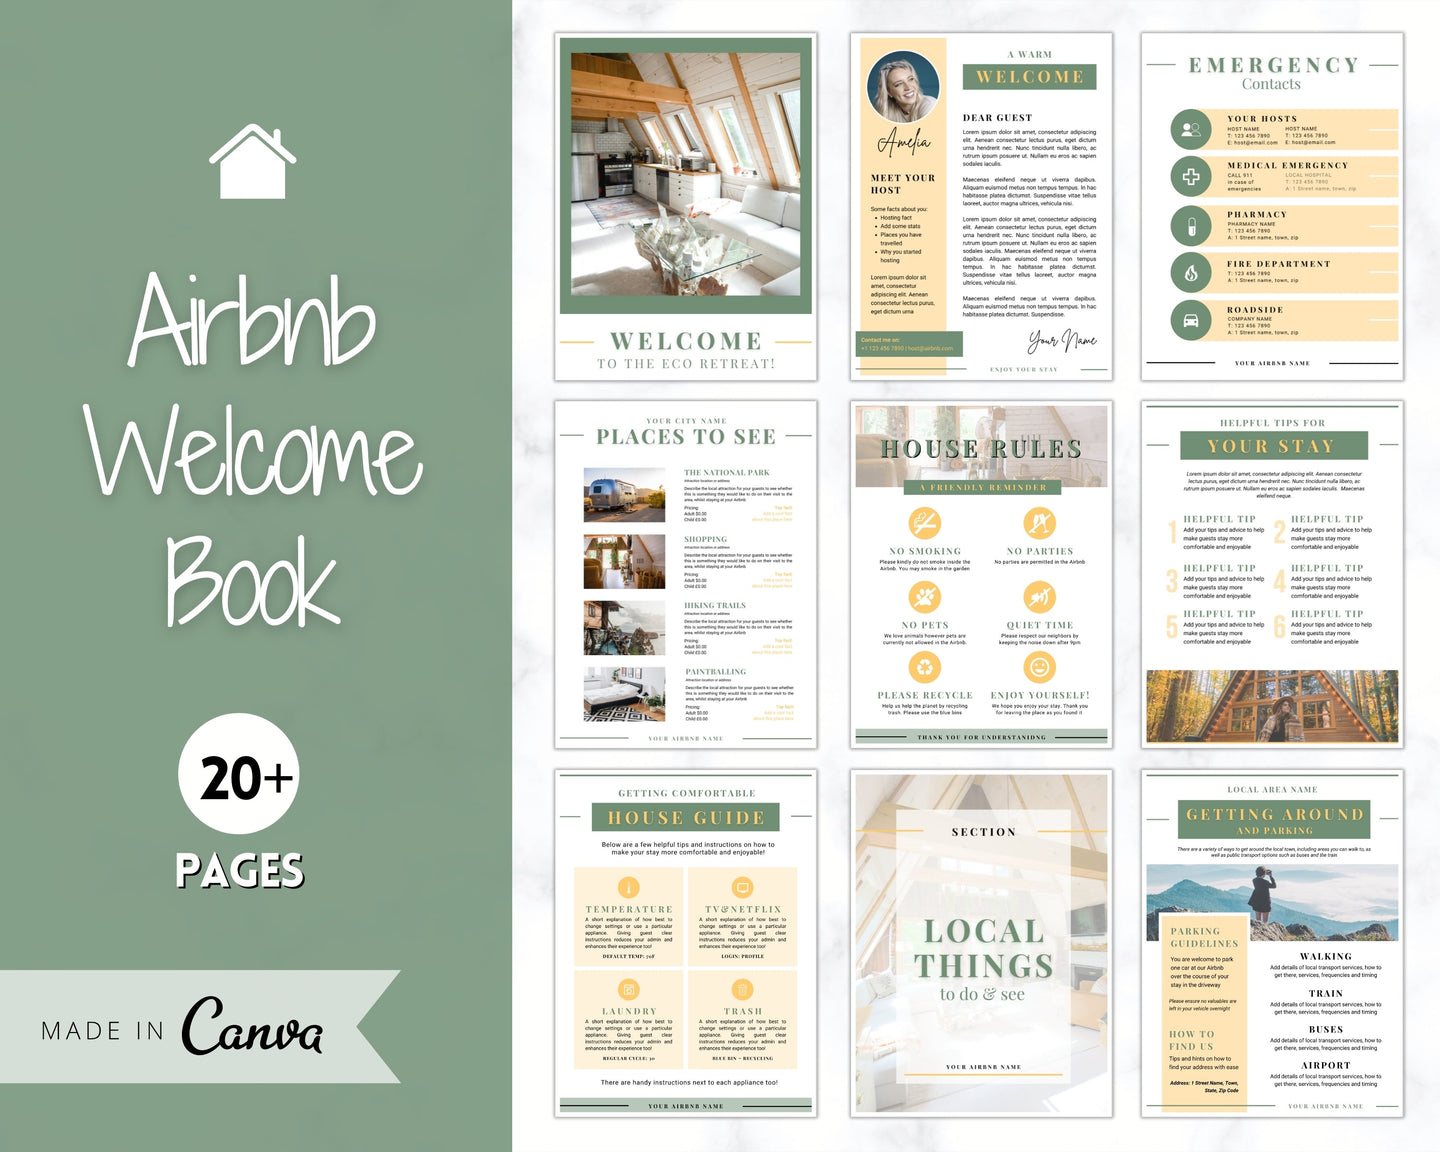 Welcome Book Template, Airbnb Welcome Guide, Editable Canva Air bnb House manual, Superhost eBook, Host signs, Signage, VRBO Vacation Rental | Green / Yellow